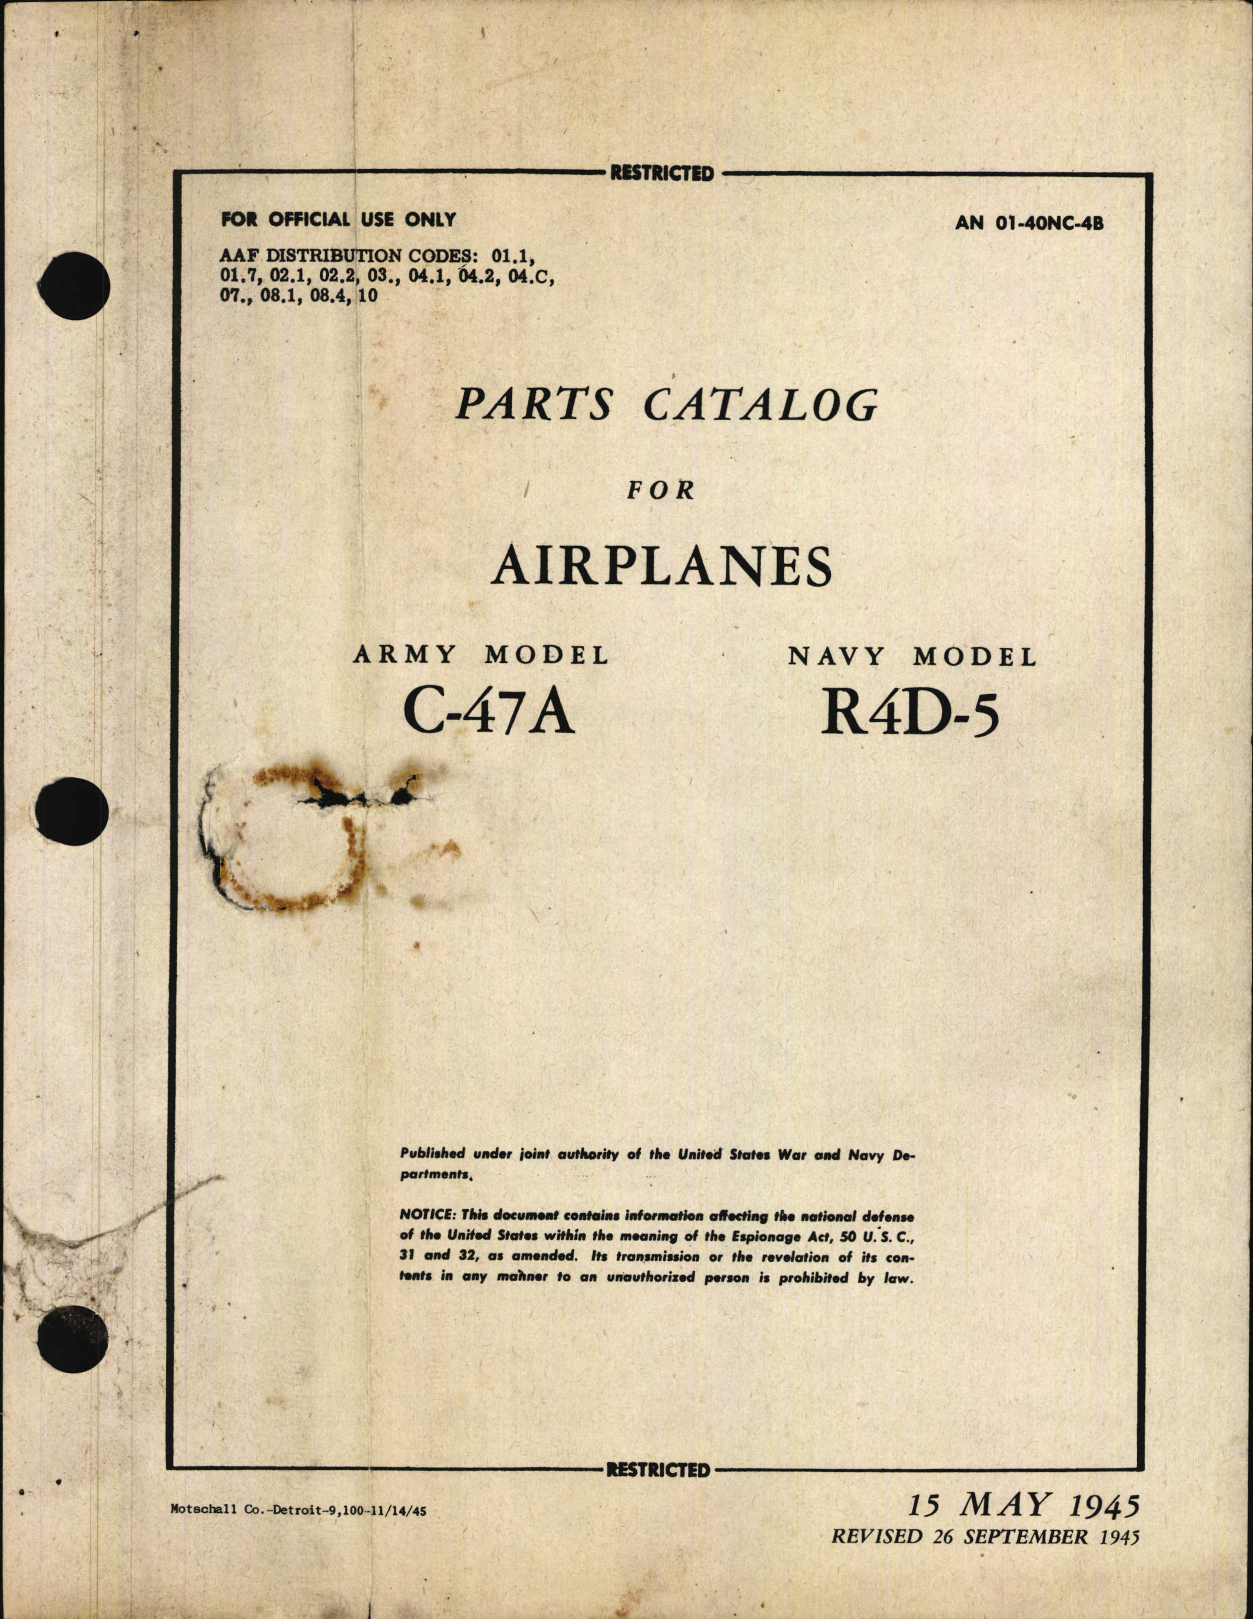 Sample page 1 from AirCorps Library document: Parts Catalog for C-47A and R4D-5 Airplanes